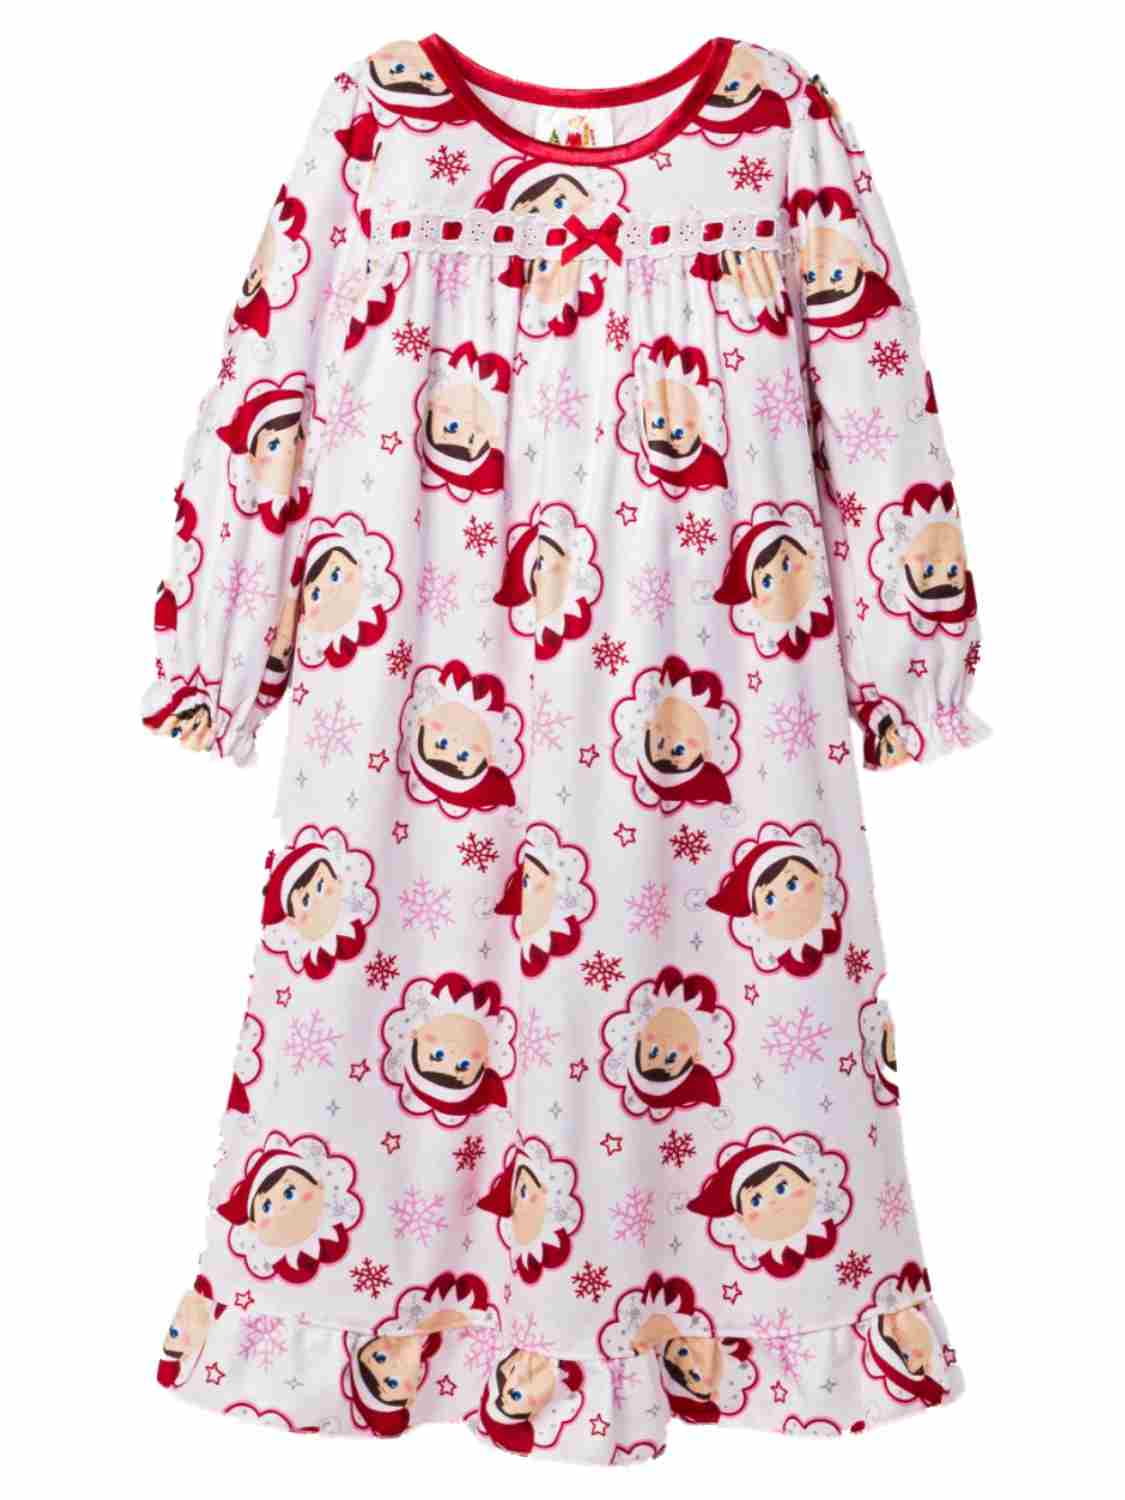 The Elf on the Shelf - Elf On The Shelf Infant Toddler Girls Nightgown